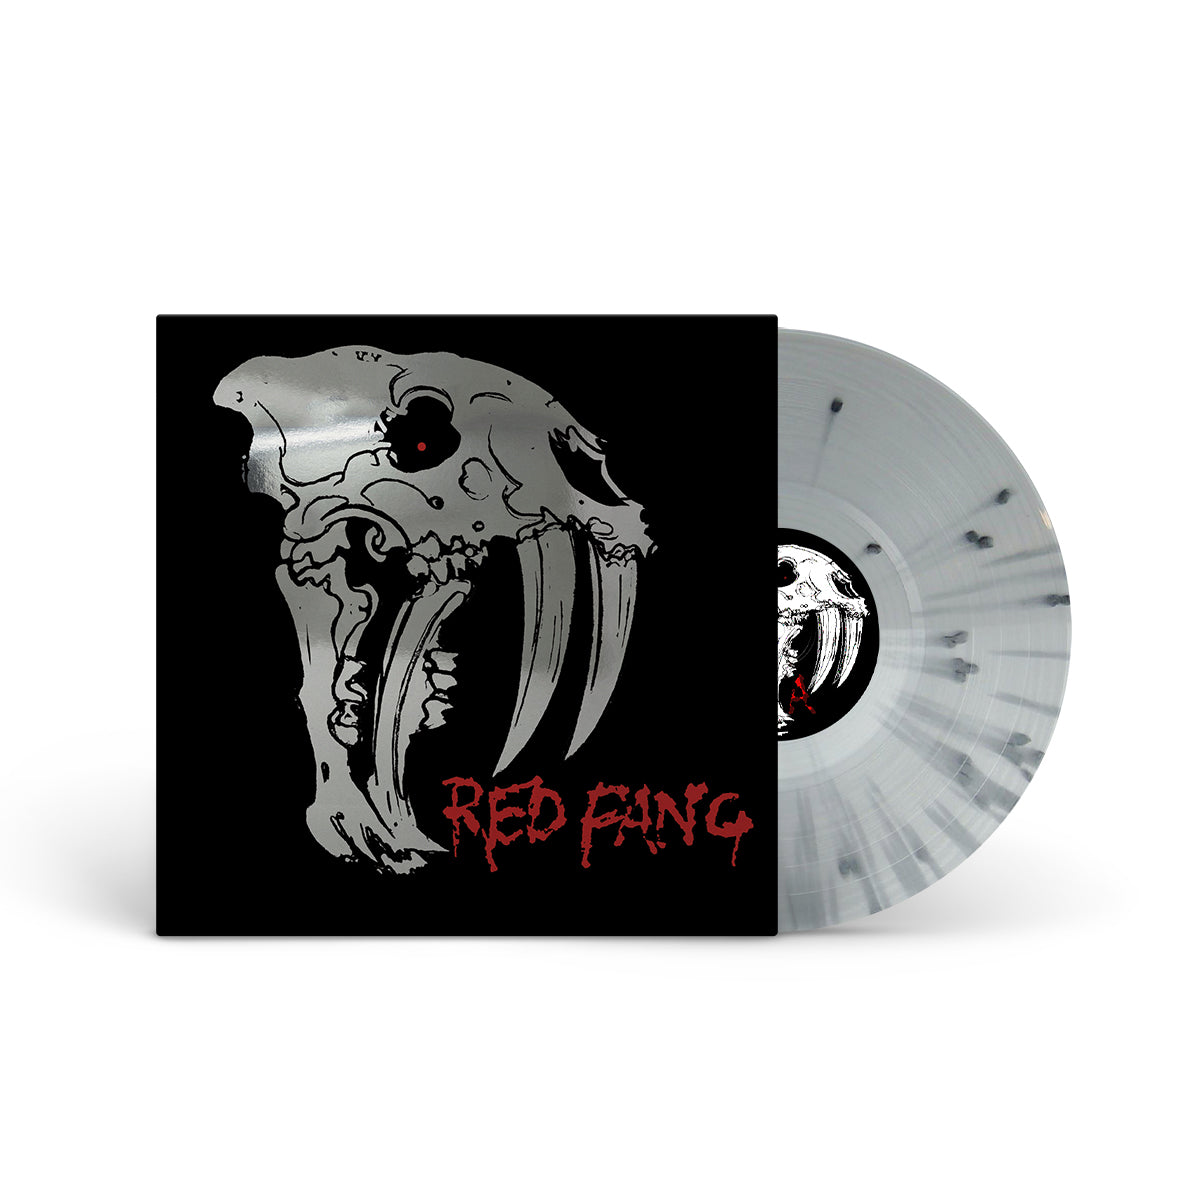 RED FANG "Red Fang - 15th Anniversary" LP